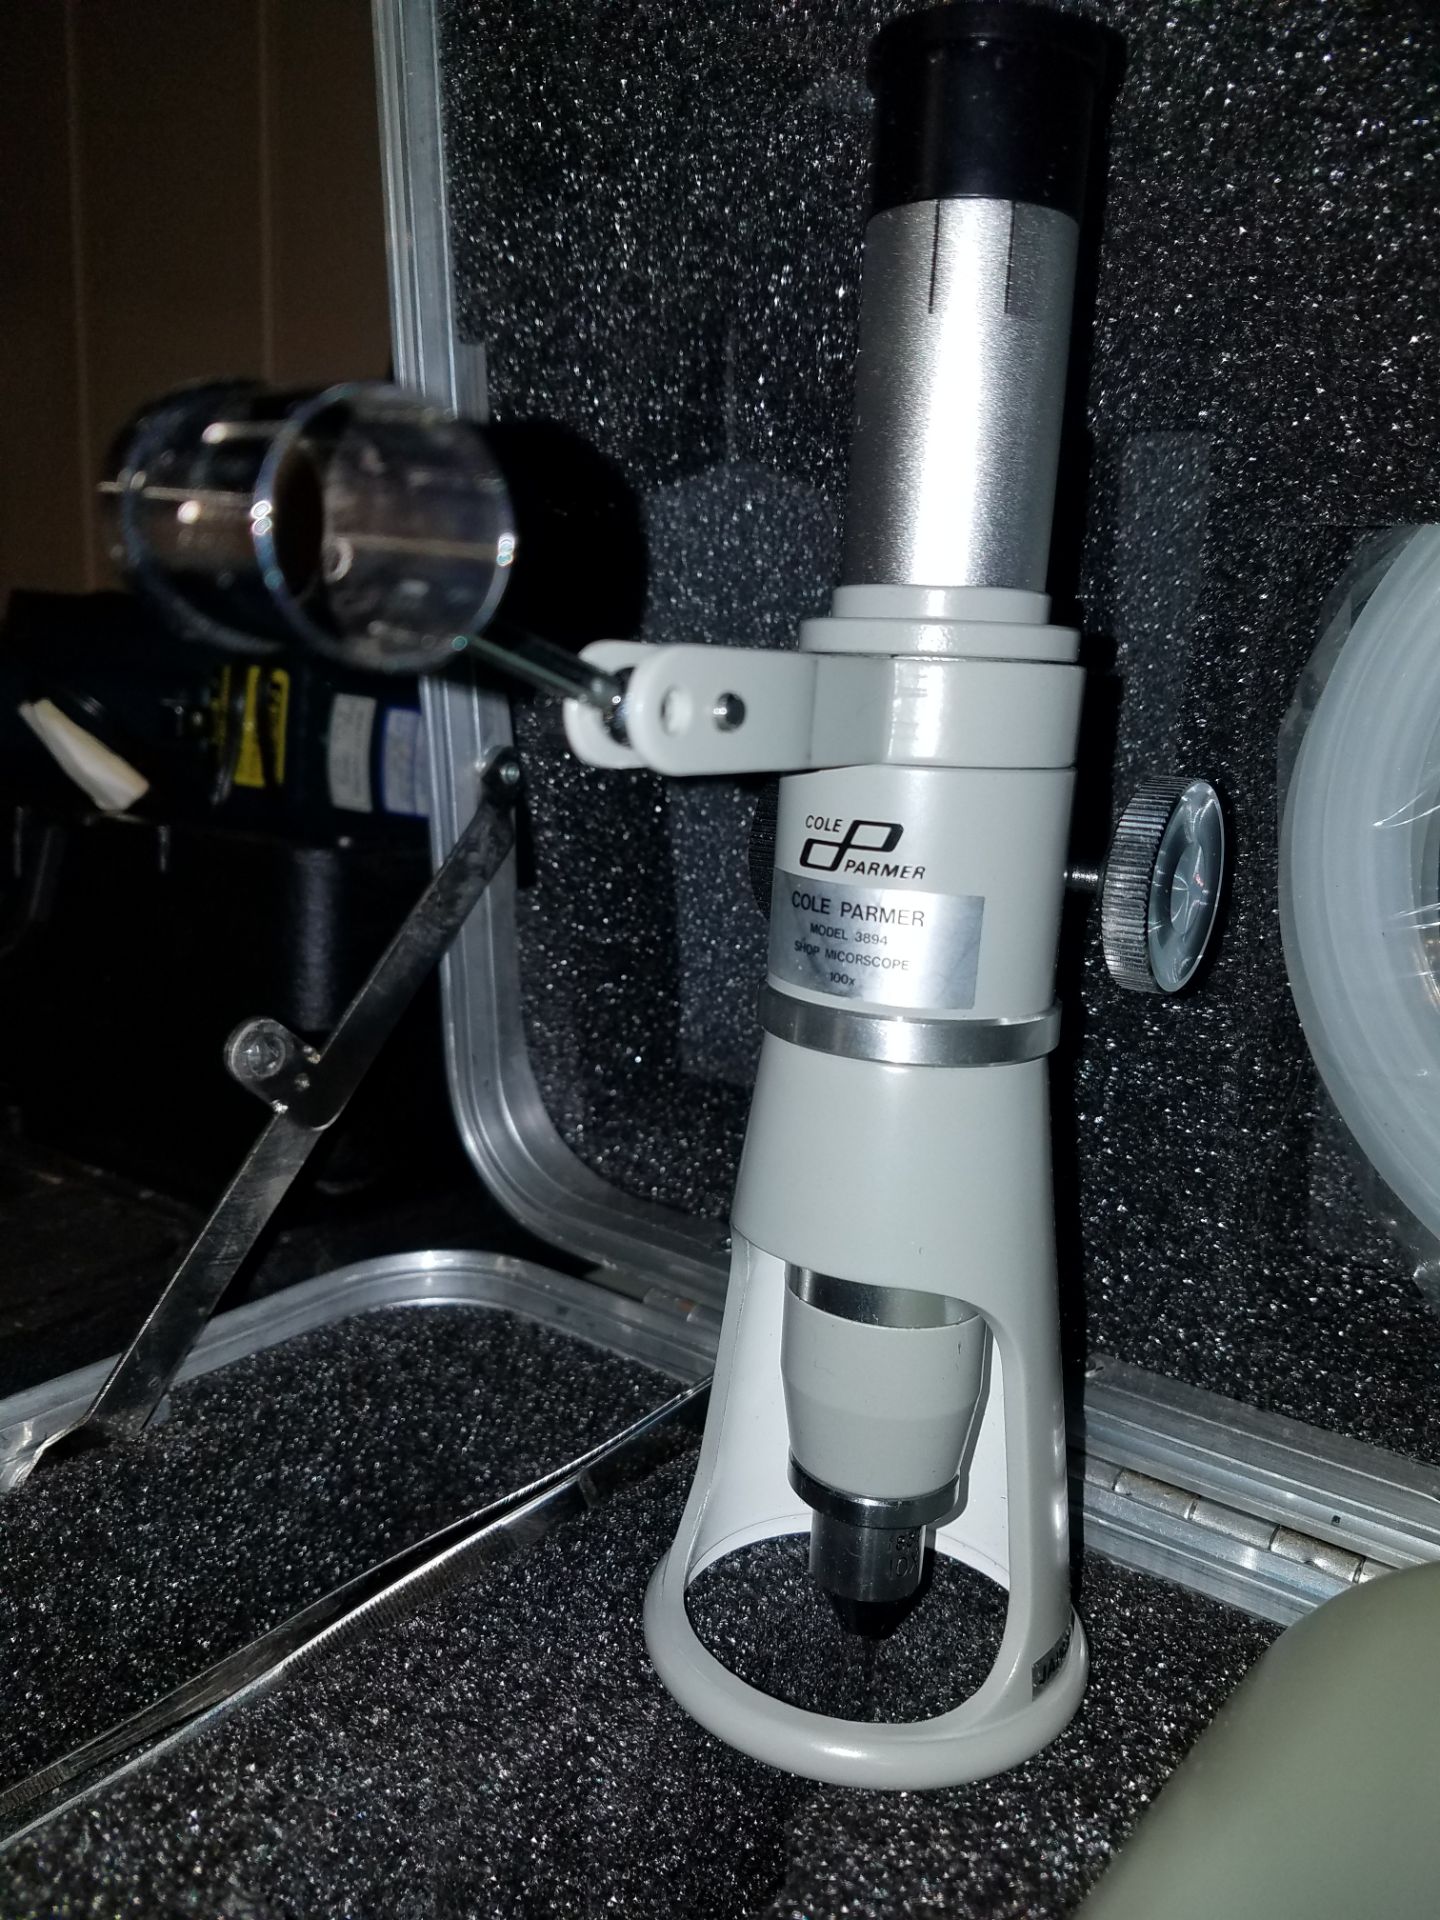 COLE PALMER SHOP MICROSCOPE MODEL 3894(LOCATED AT 2651 S 600 E. COLUMBIA CITY, IN 46725) - Image 2 of 3